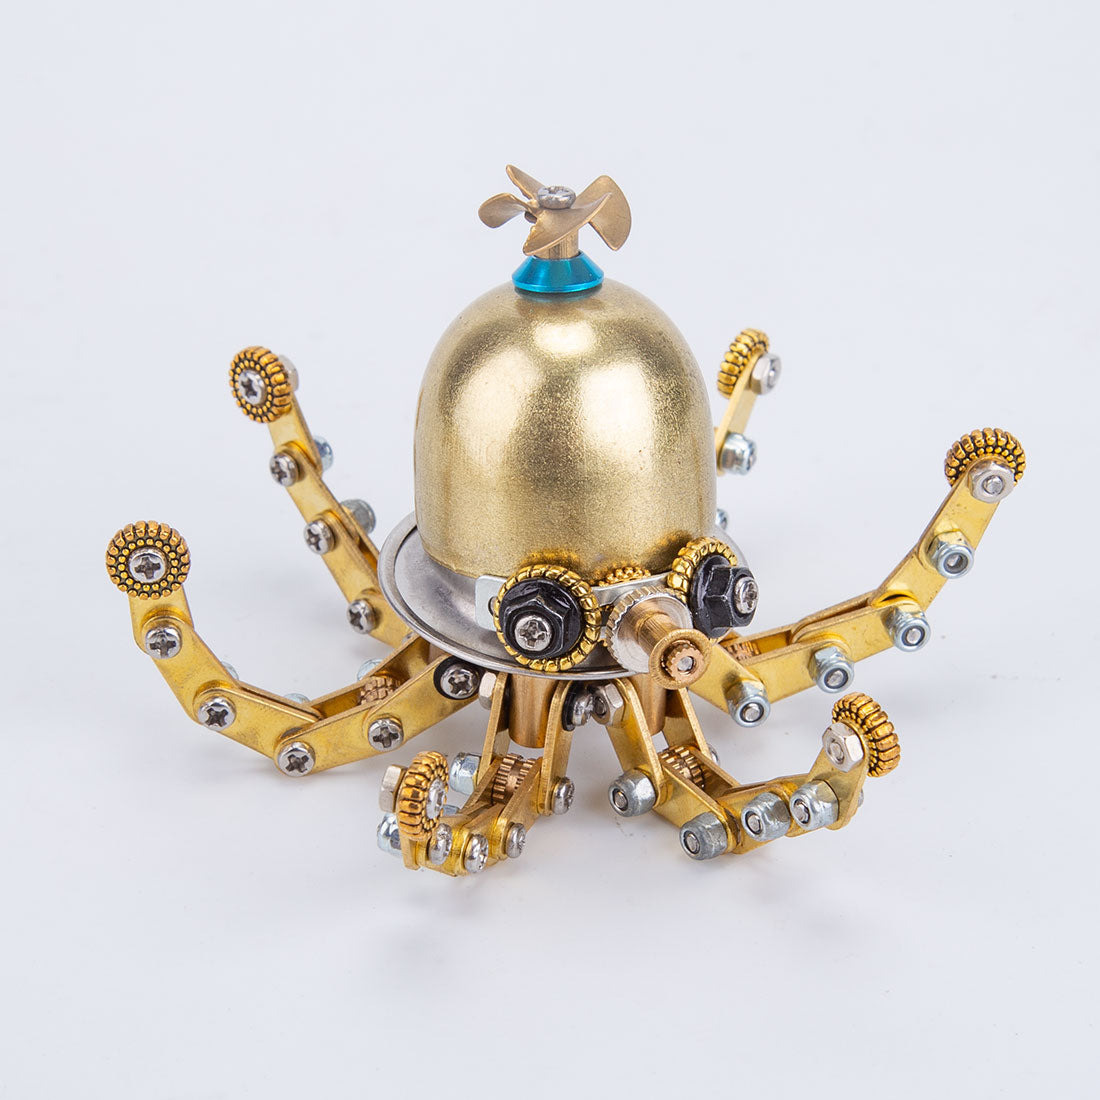 Steampunk Tiny Octopus in Goggles 3D Metal Model Kits for Kids